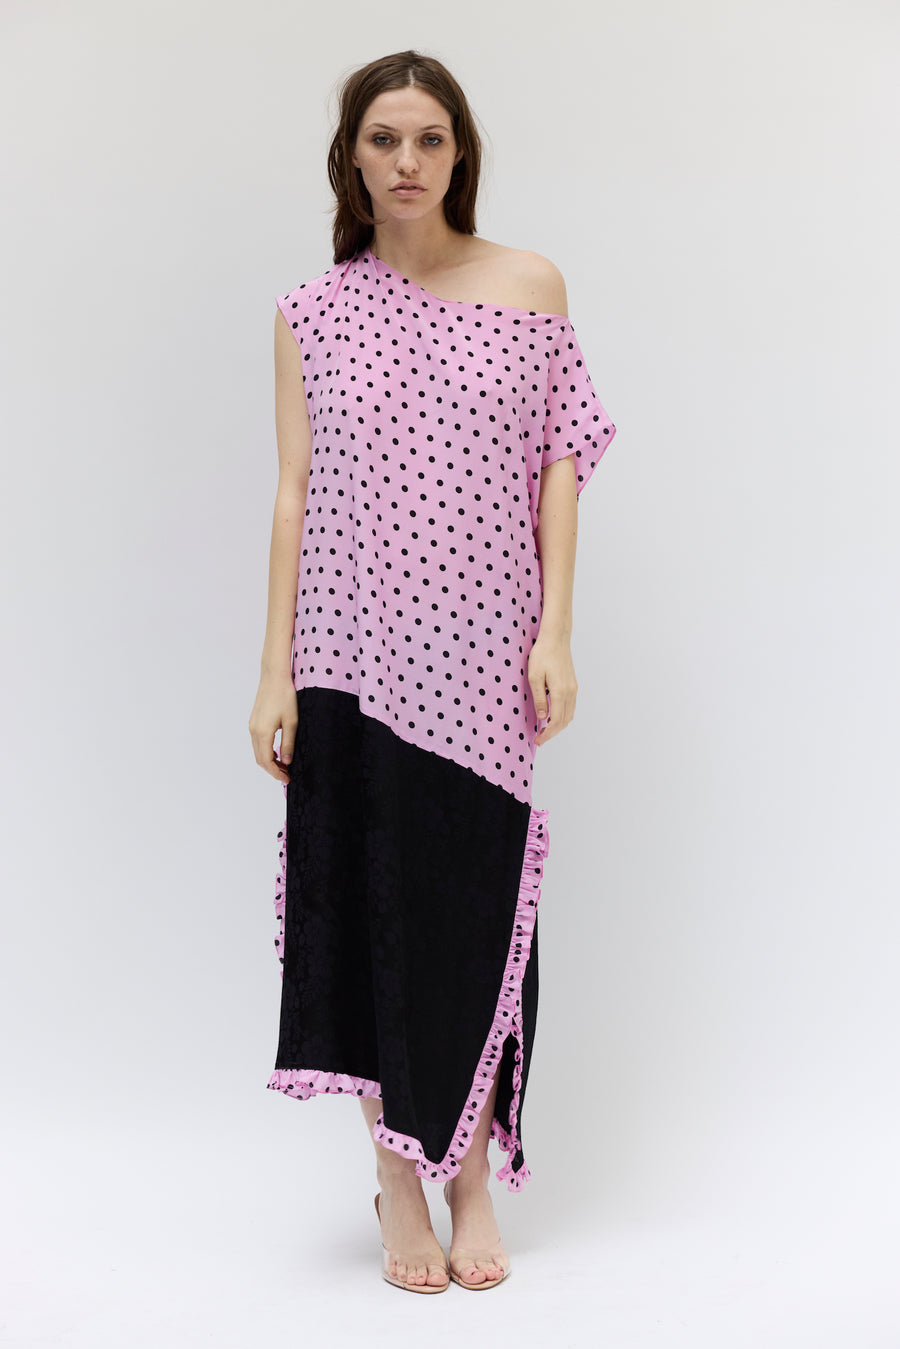 Caftan in Pink and Black Dots